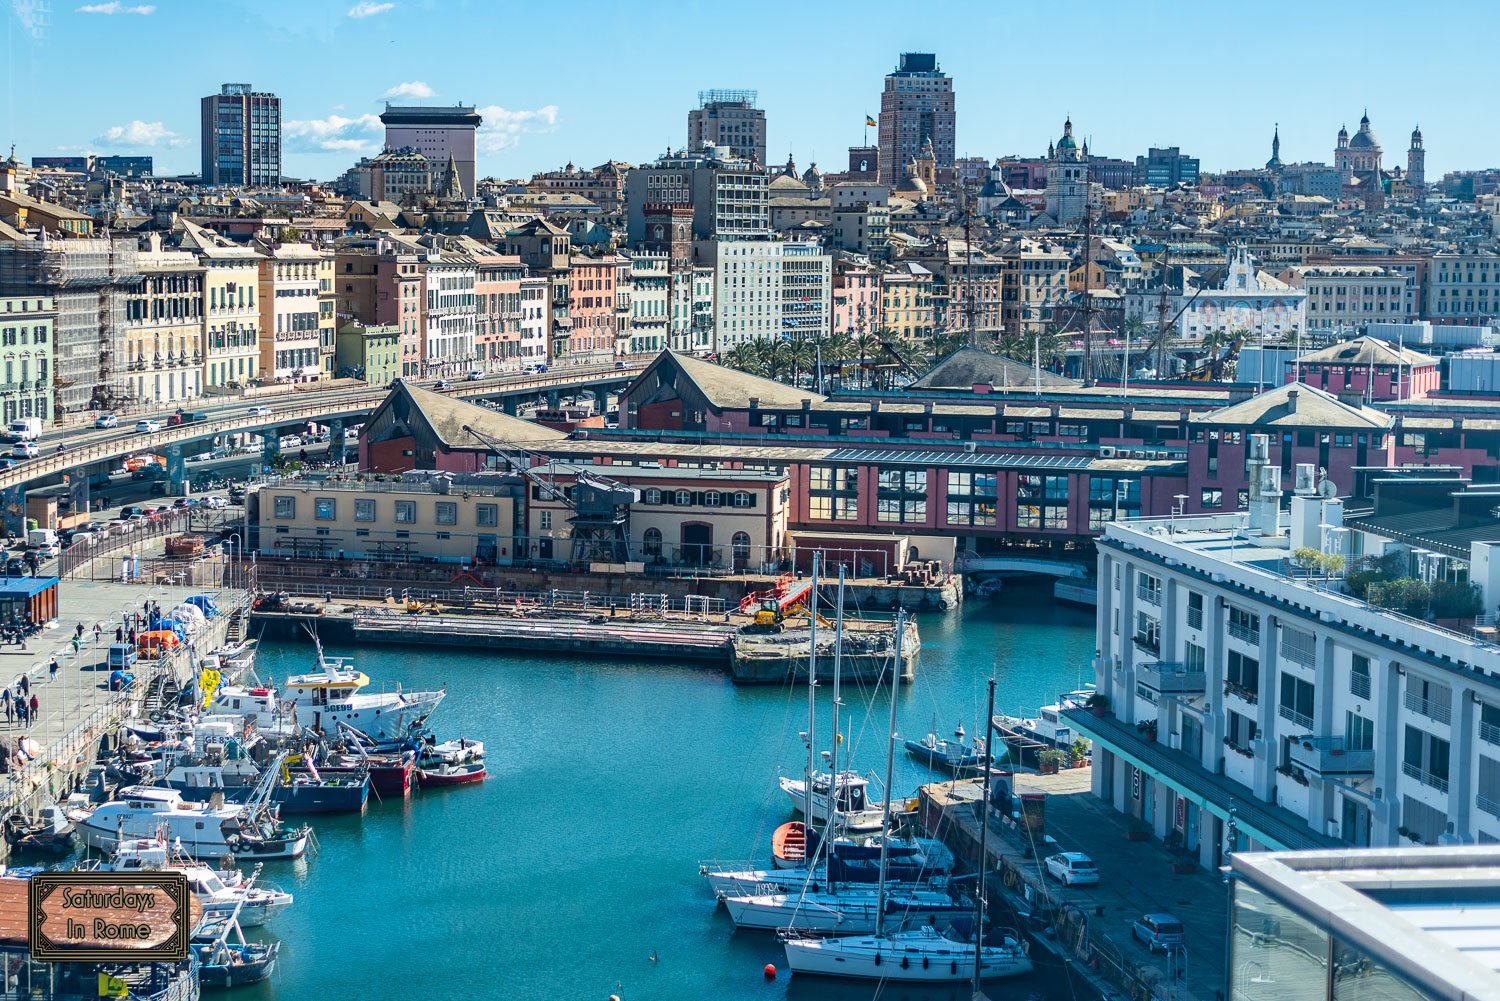 Things To See In Genoa - The Old Port of Genoa